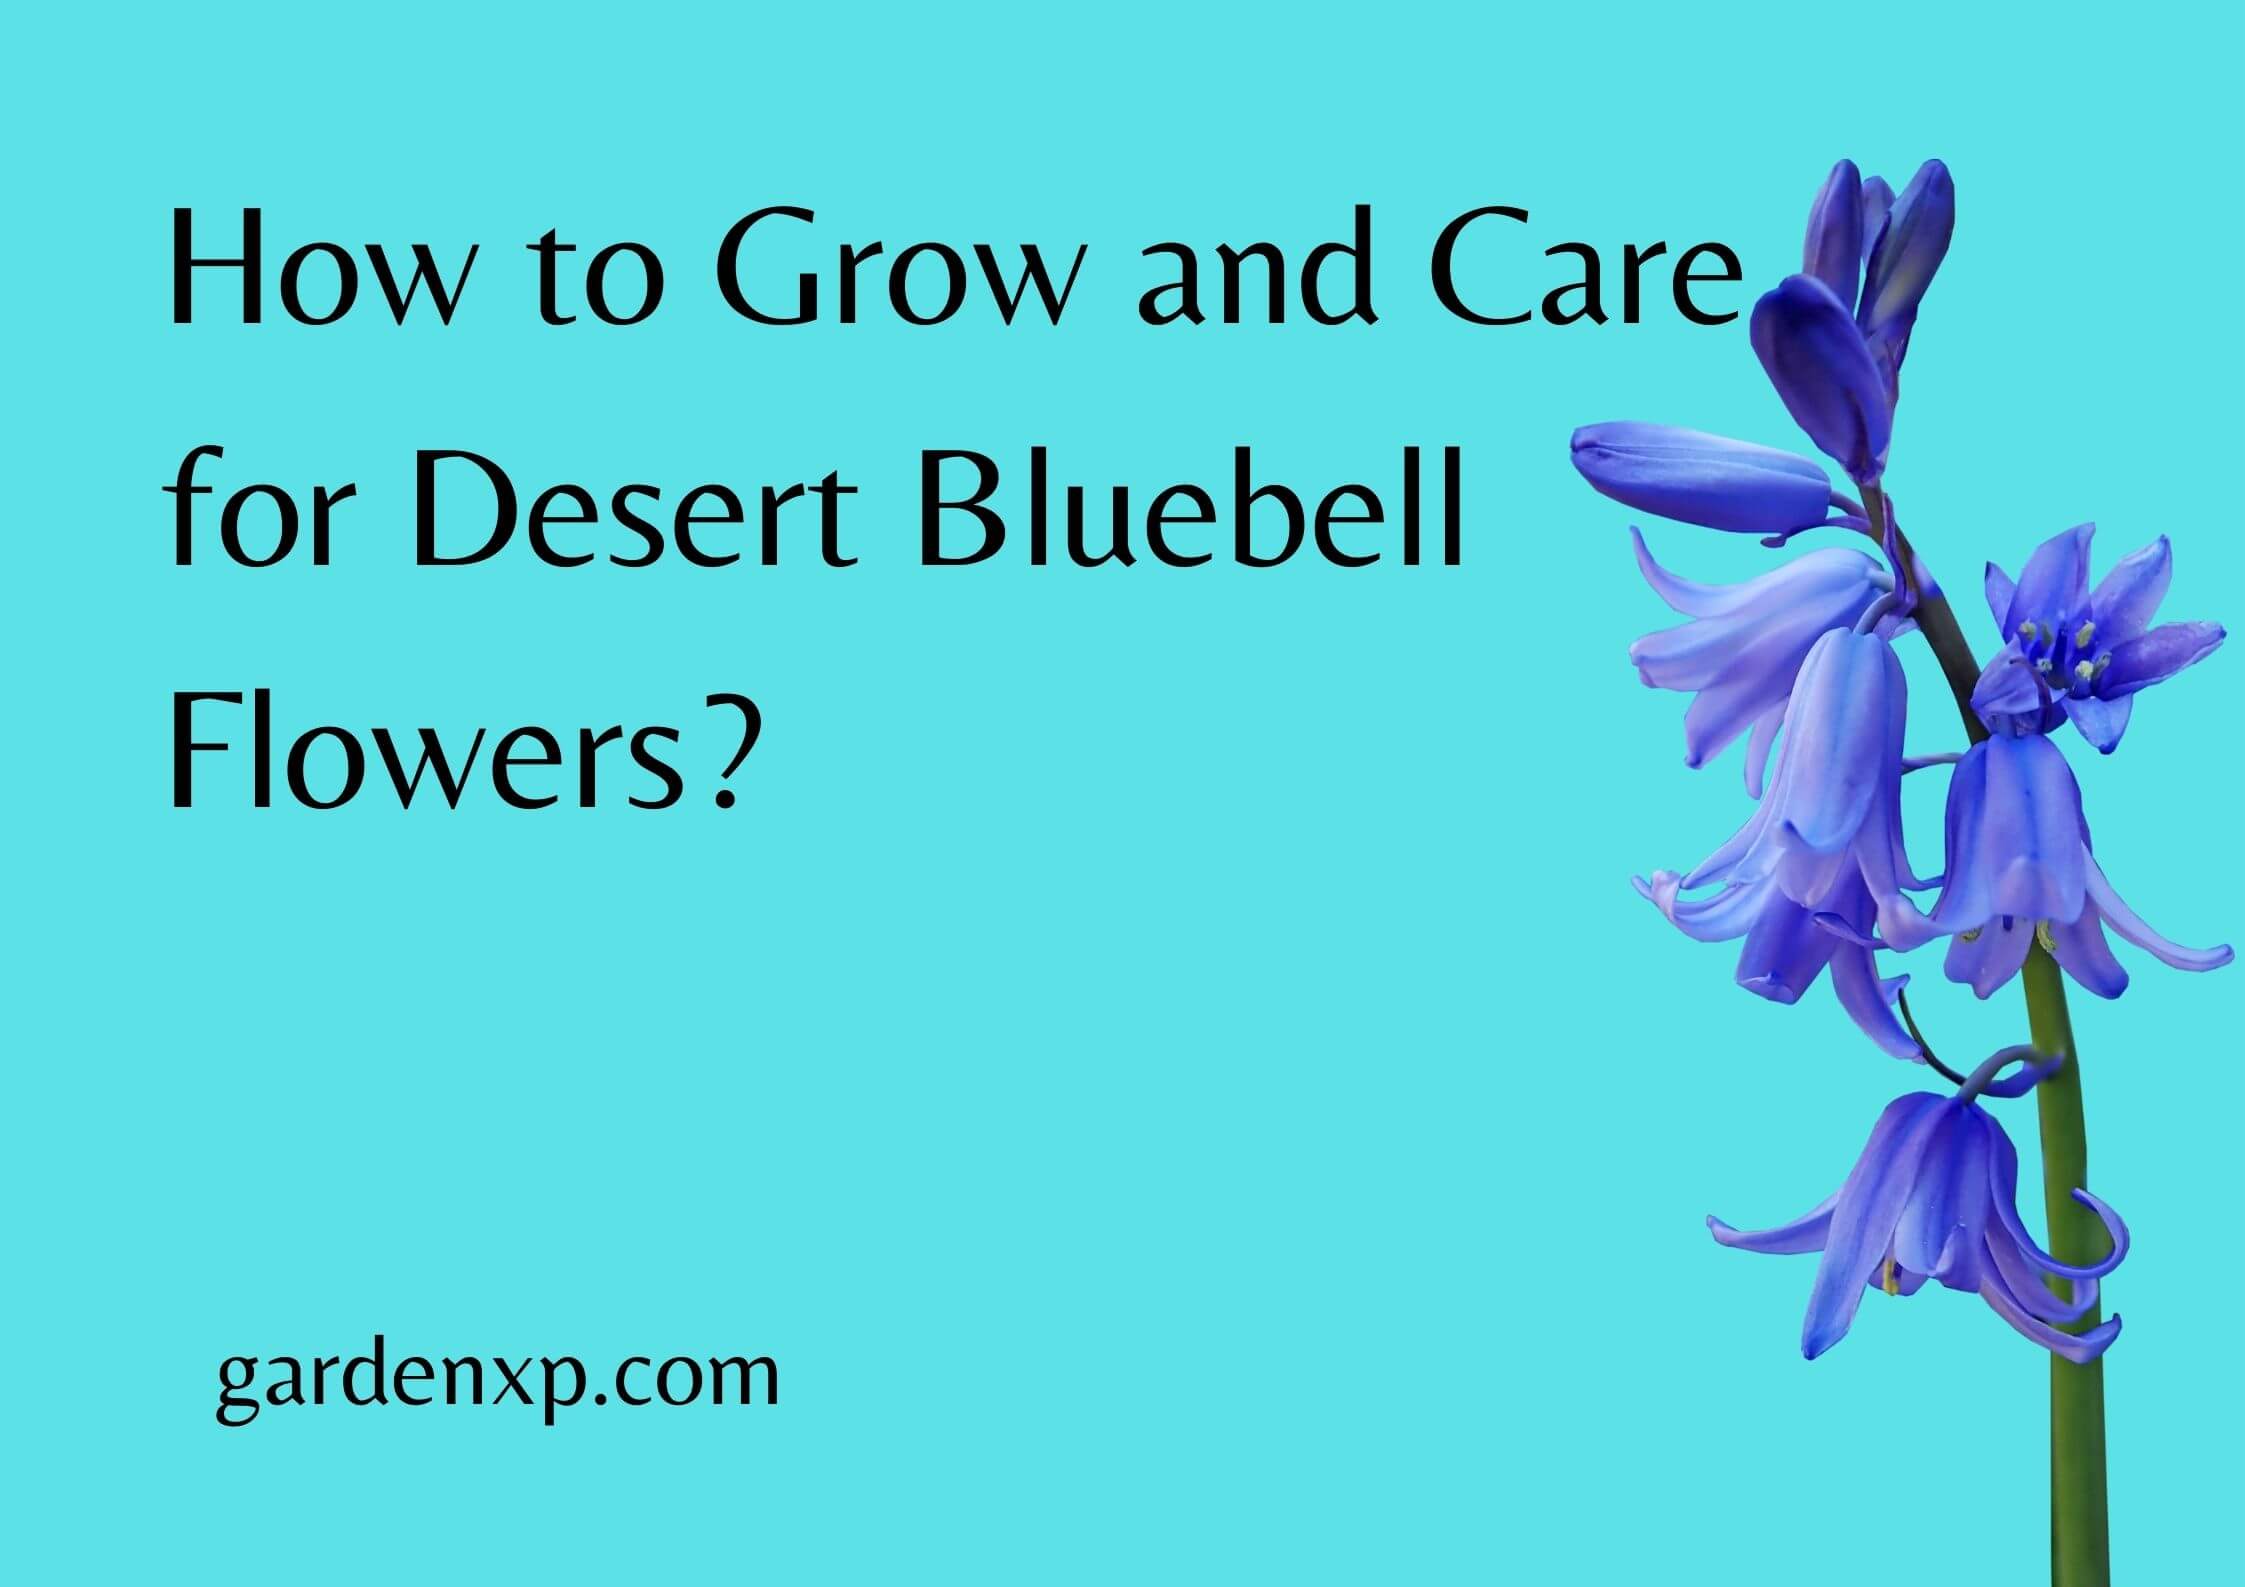 How to Grow and Care for Desert Bluebell Flowers?